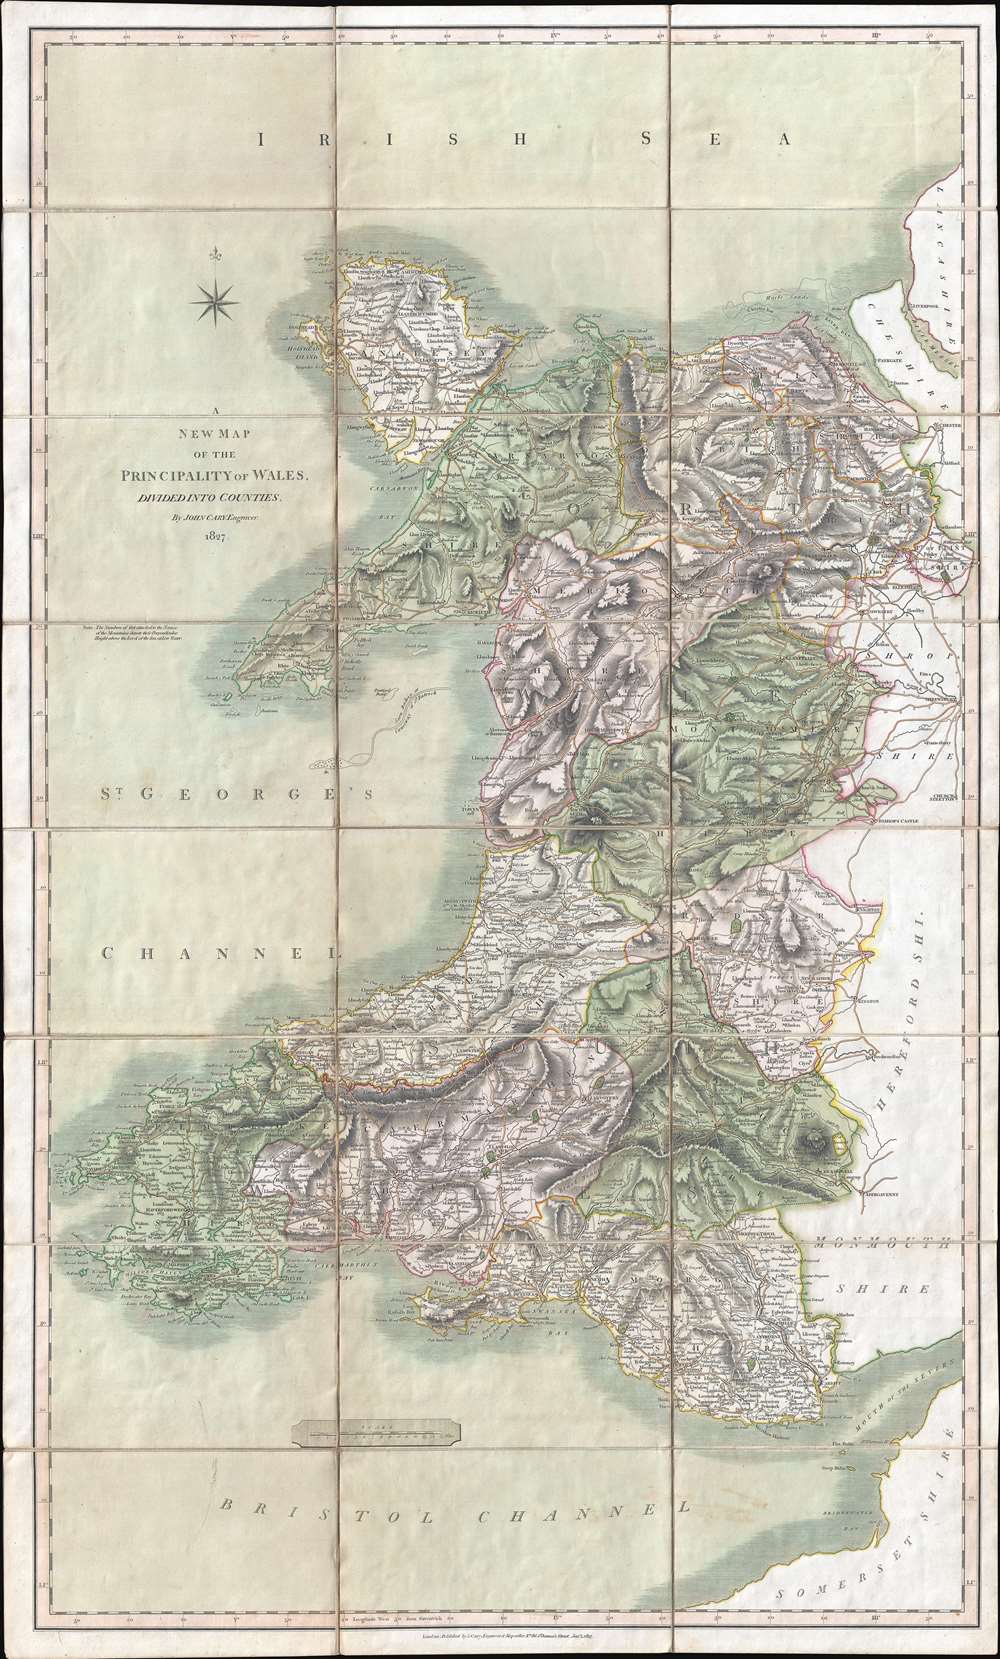 A New Map of the Principality of Wales. Divided into Counties. - Main View